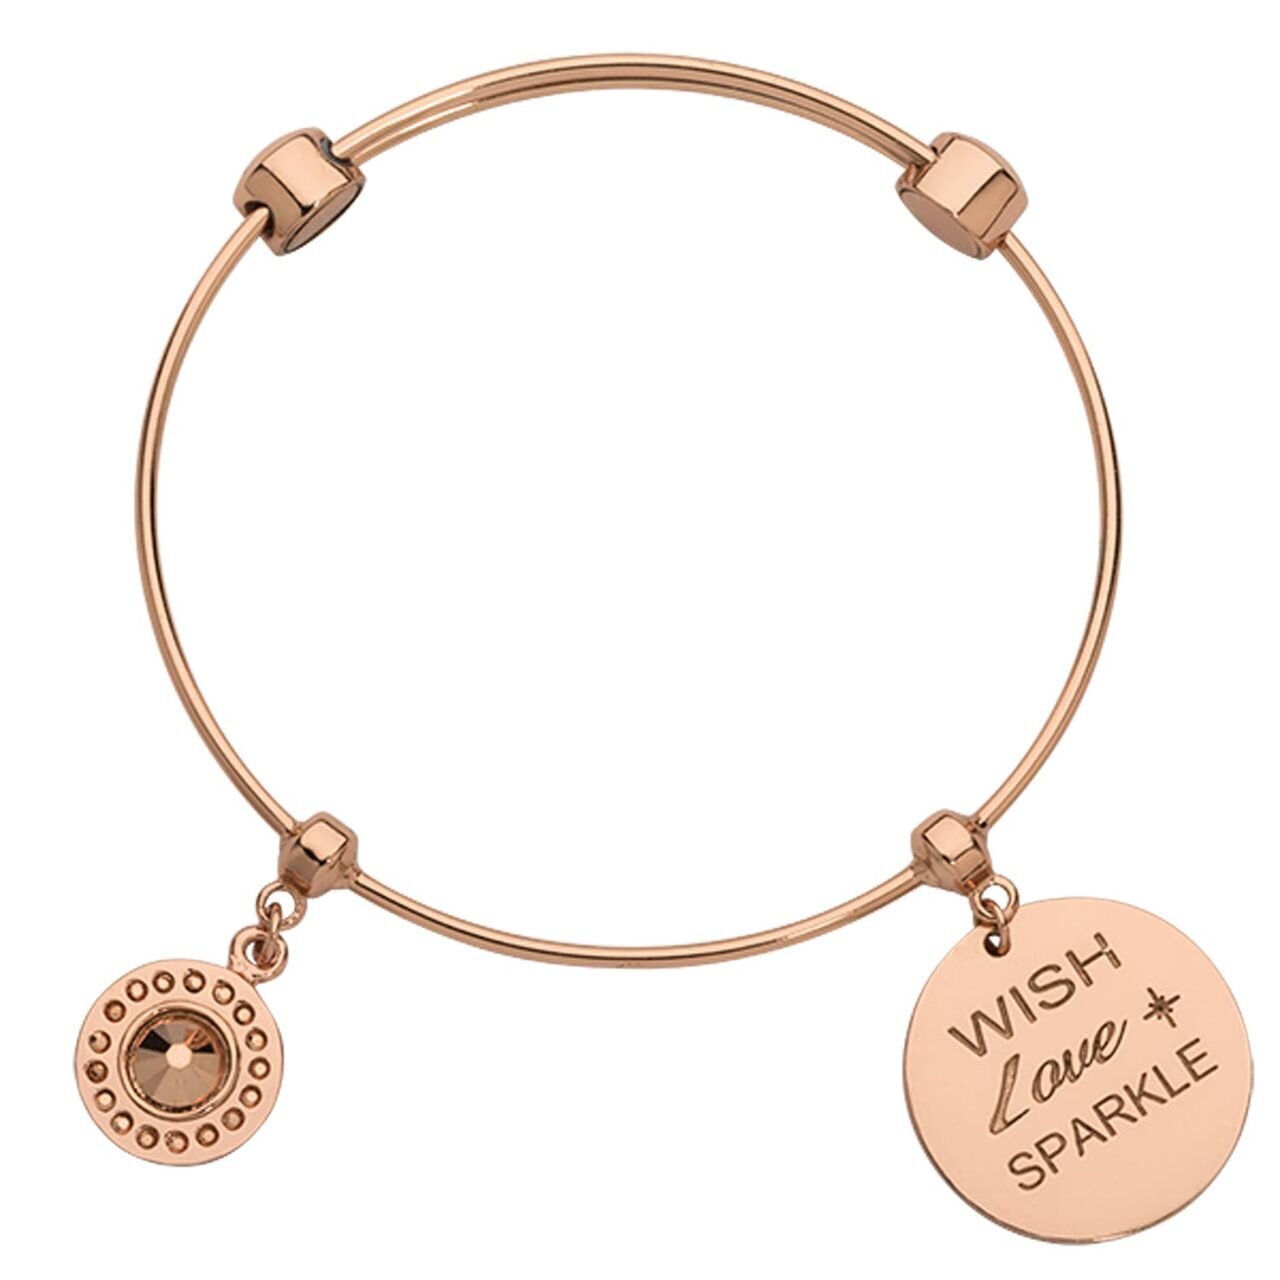 Nikki Lissoni Charm Bangle with Two Fixed Charms Rose Wish Love Sparkle Rose Gold-plated 17cm B1142RG17